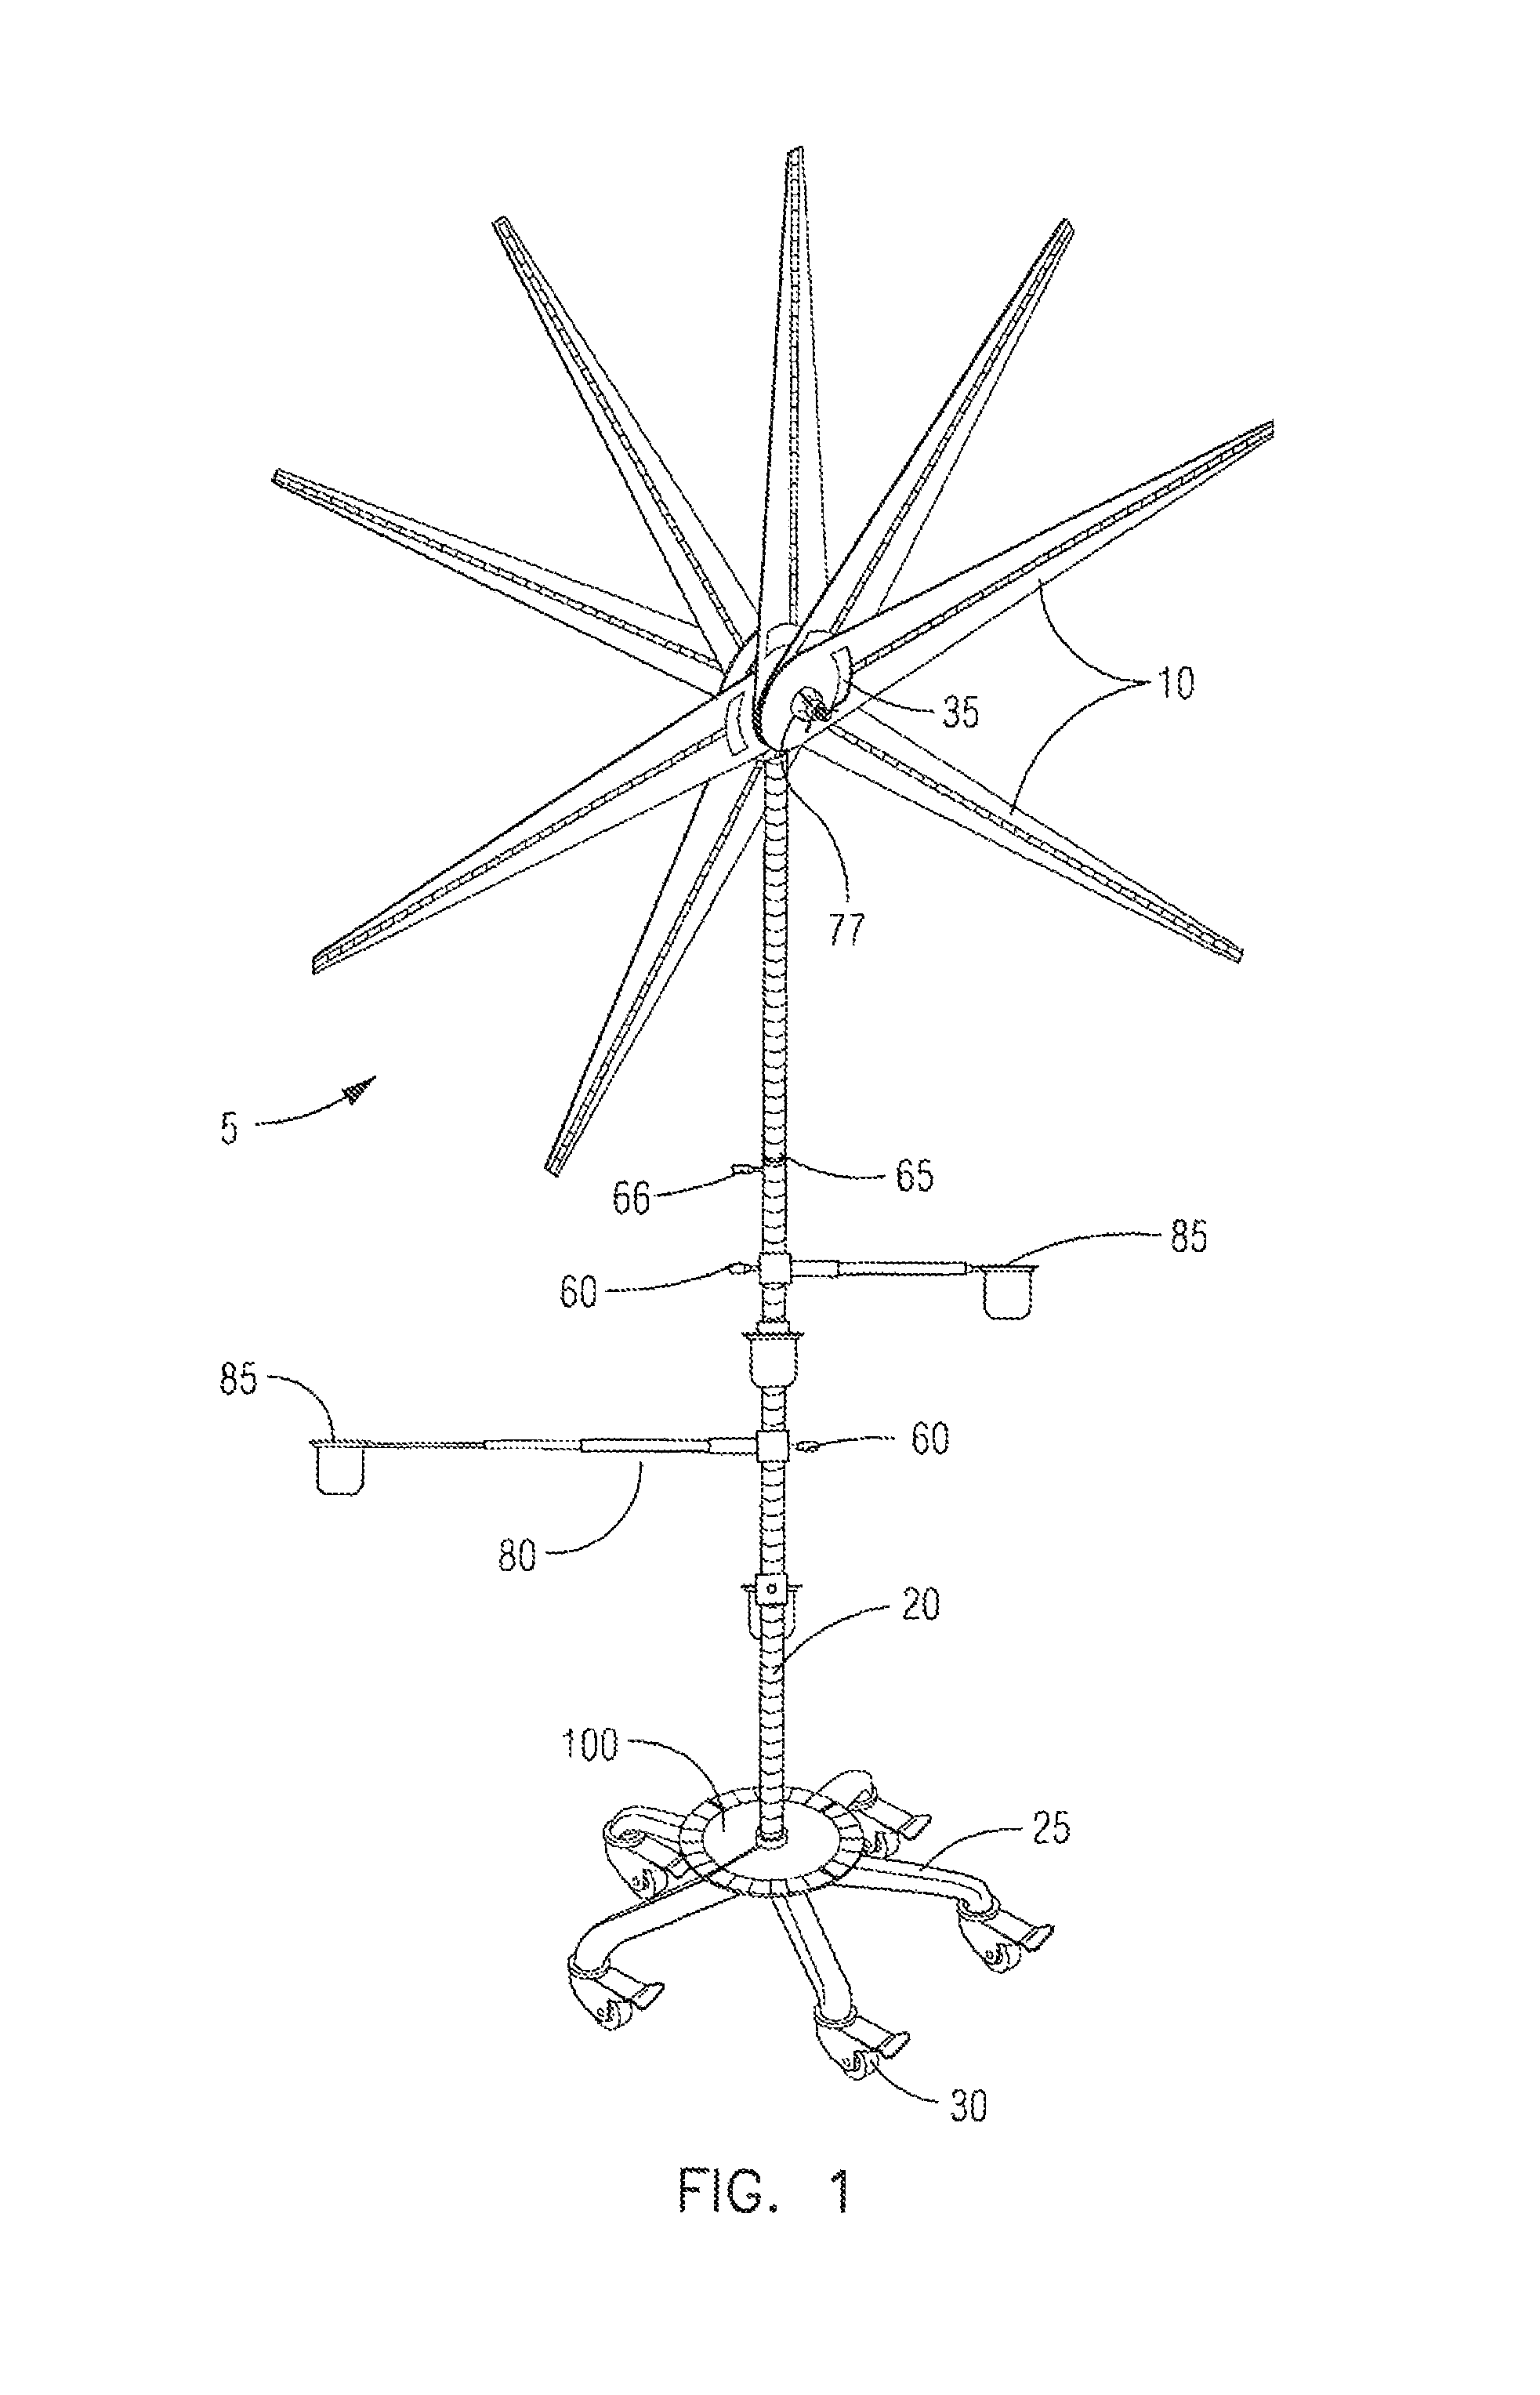 Neuromuscular testing device and method to use